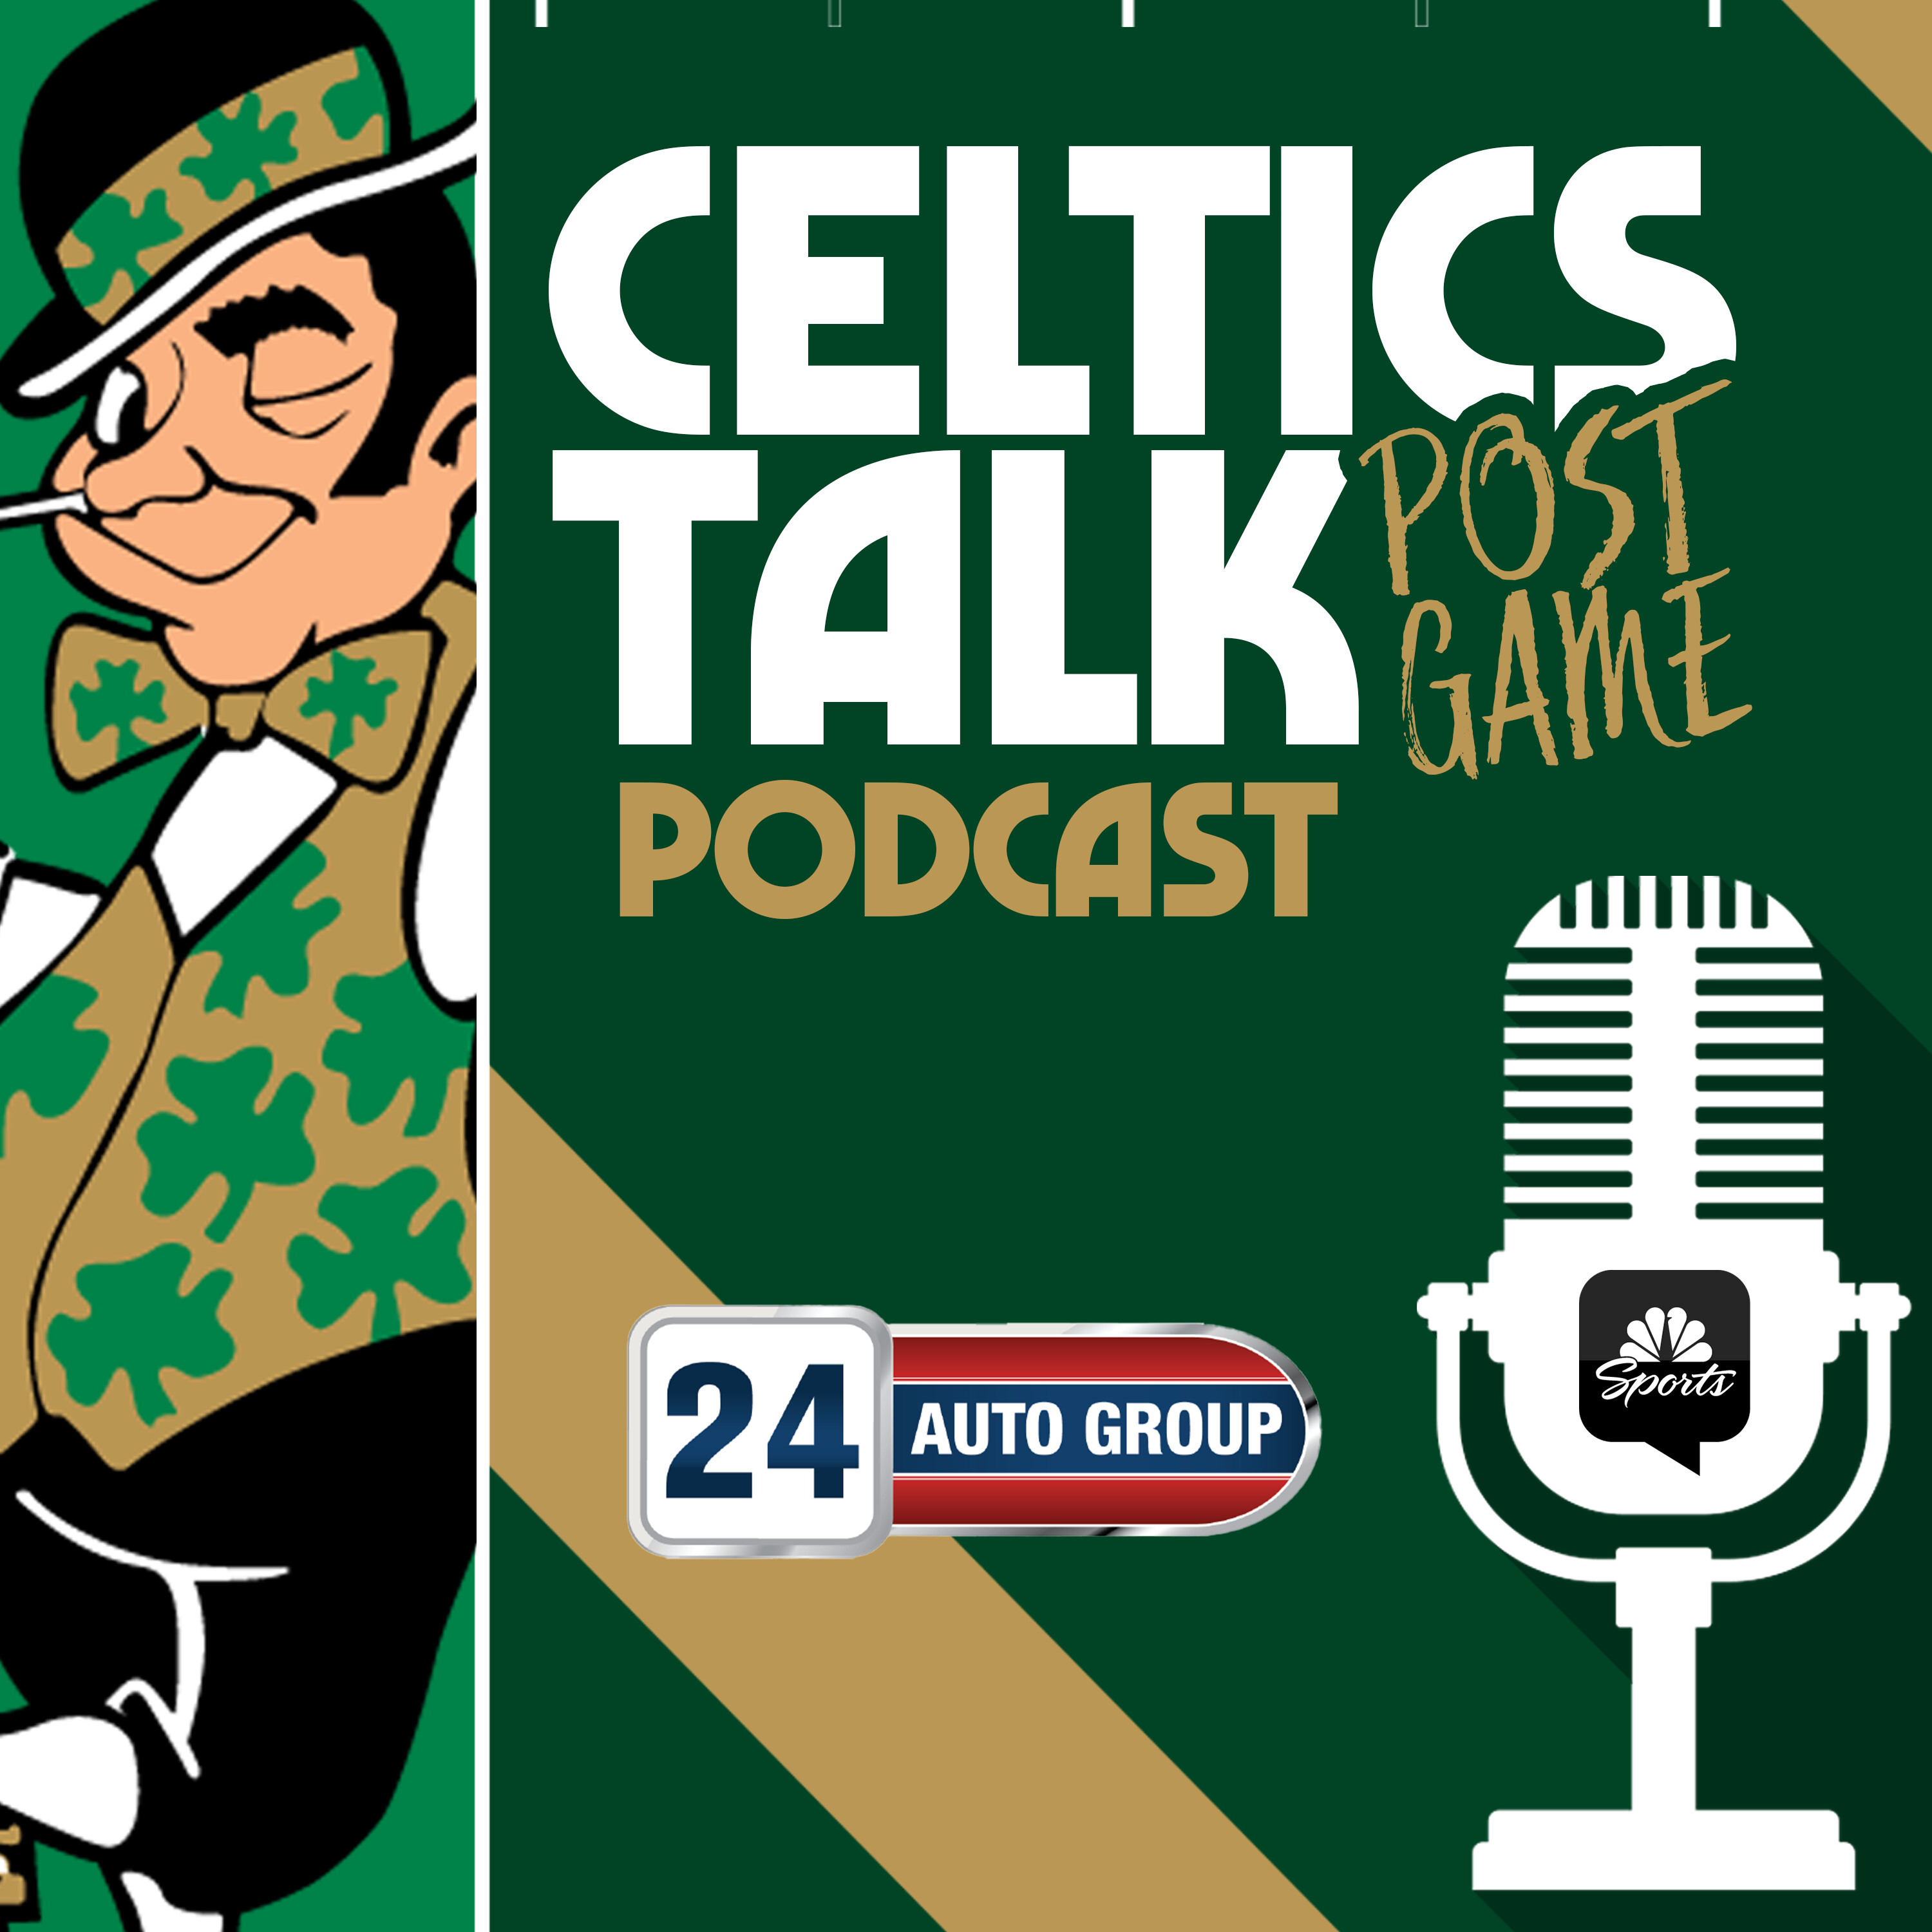 POSTGAME POD: Celtics can't overcome turnovers, fall to Heat in overtime